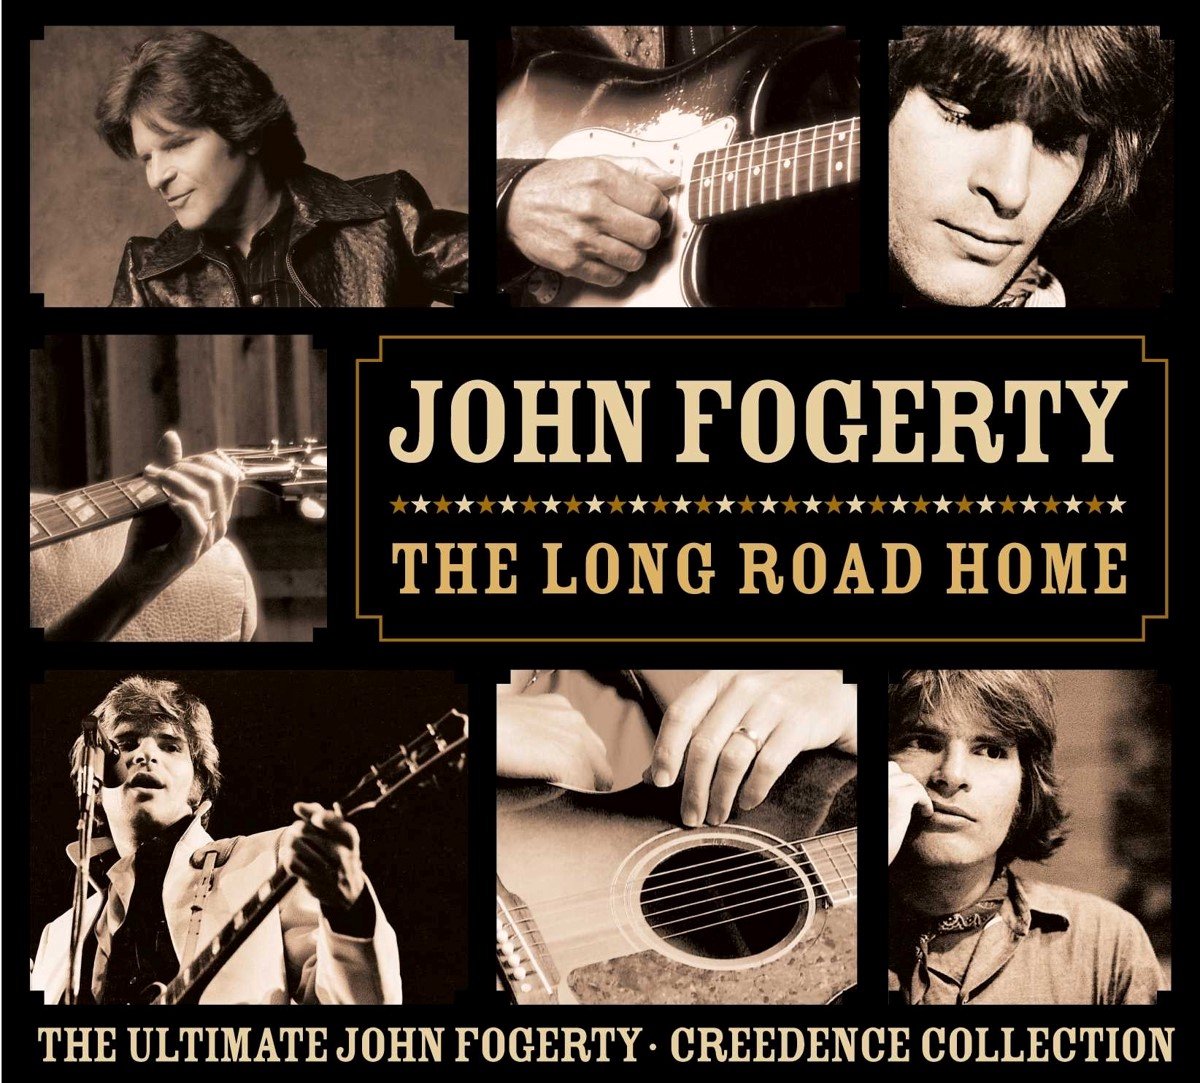 John Fogerty - The Long Road Home (Ultimate Creedence Collection) (CD) - John Fogerty